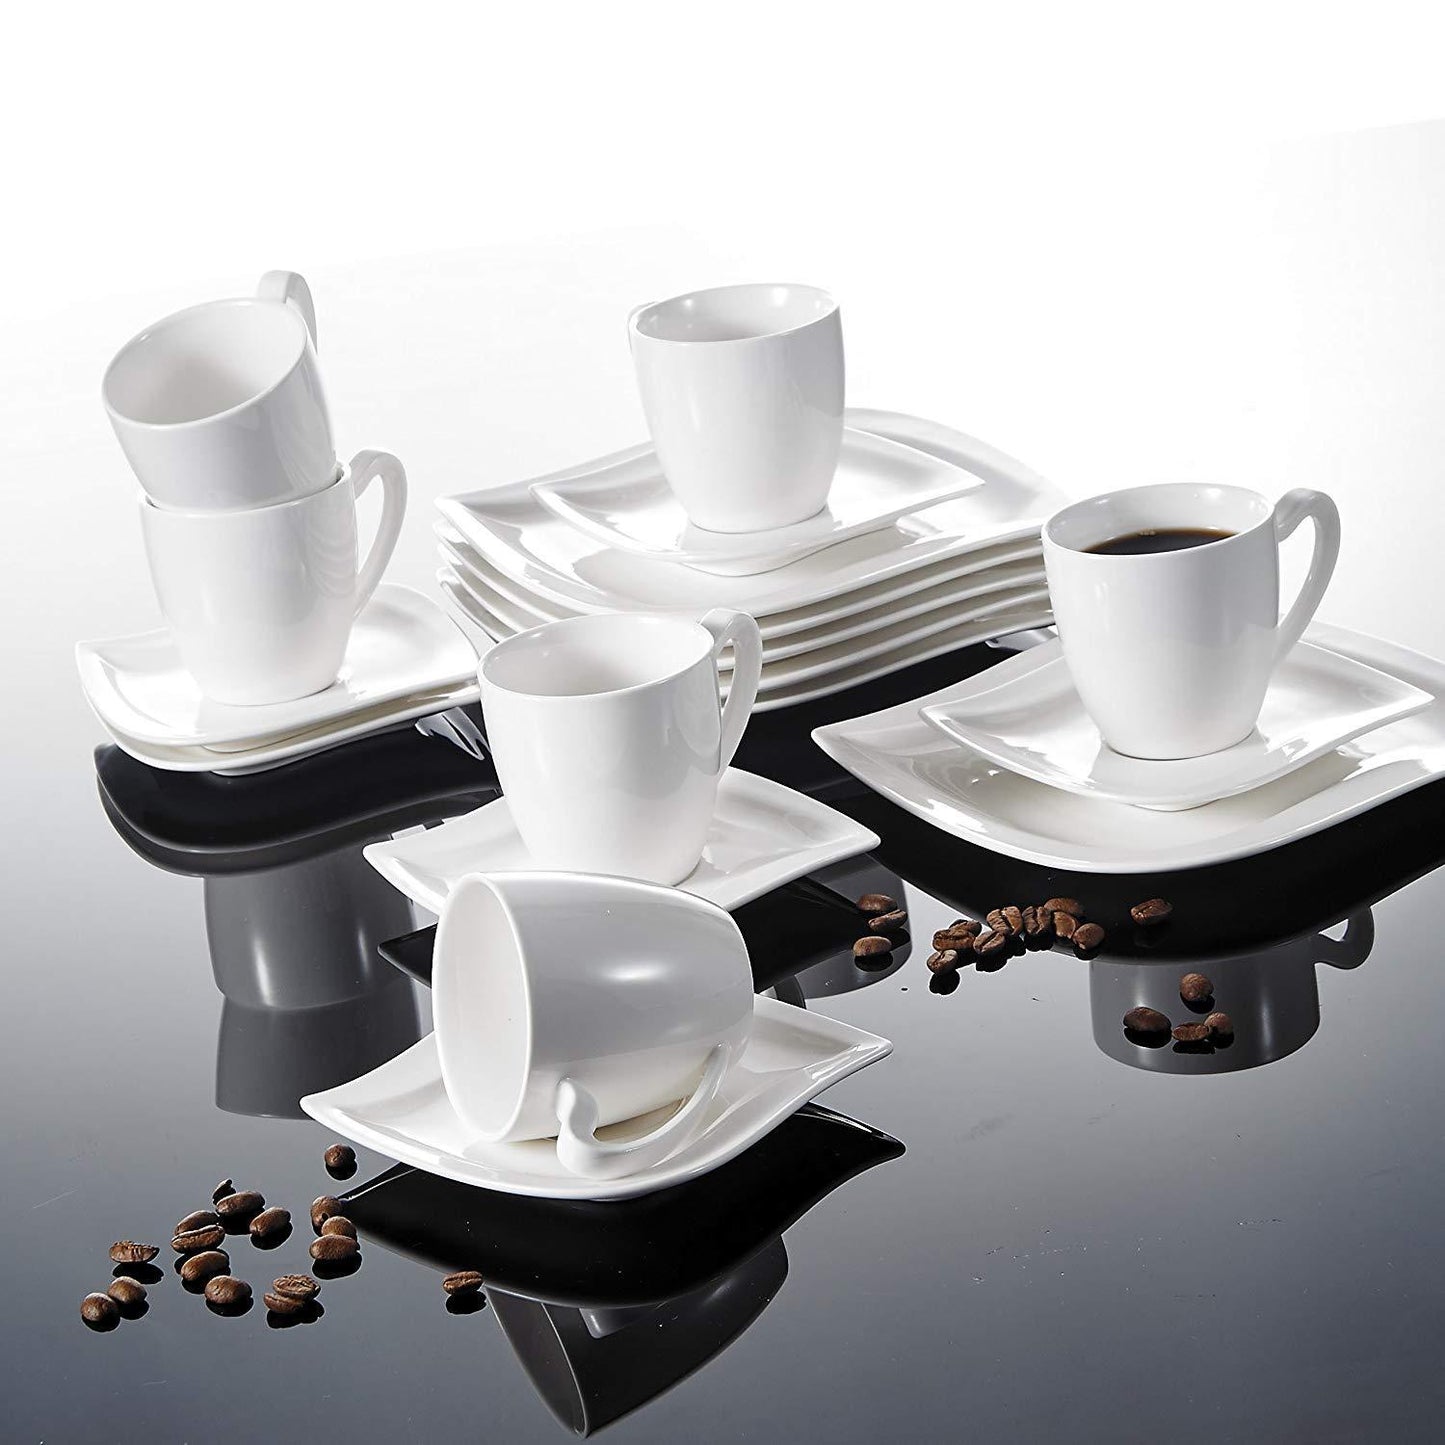 Elvira 18-Piece White Porcelain Ceramic Dinner Combi-Set with 6-Piece Coffee Cups,Saucers and Dessert Plates - Nordic Side - 18, and, Ceramic, Coffee, CombiSet, CupsSaucers, Dessert, Dinner, 